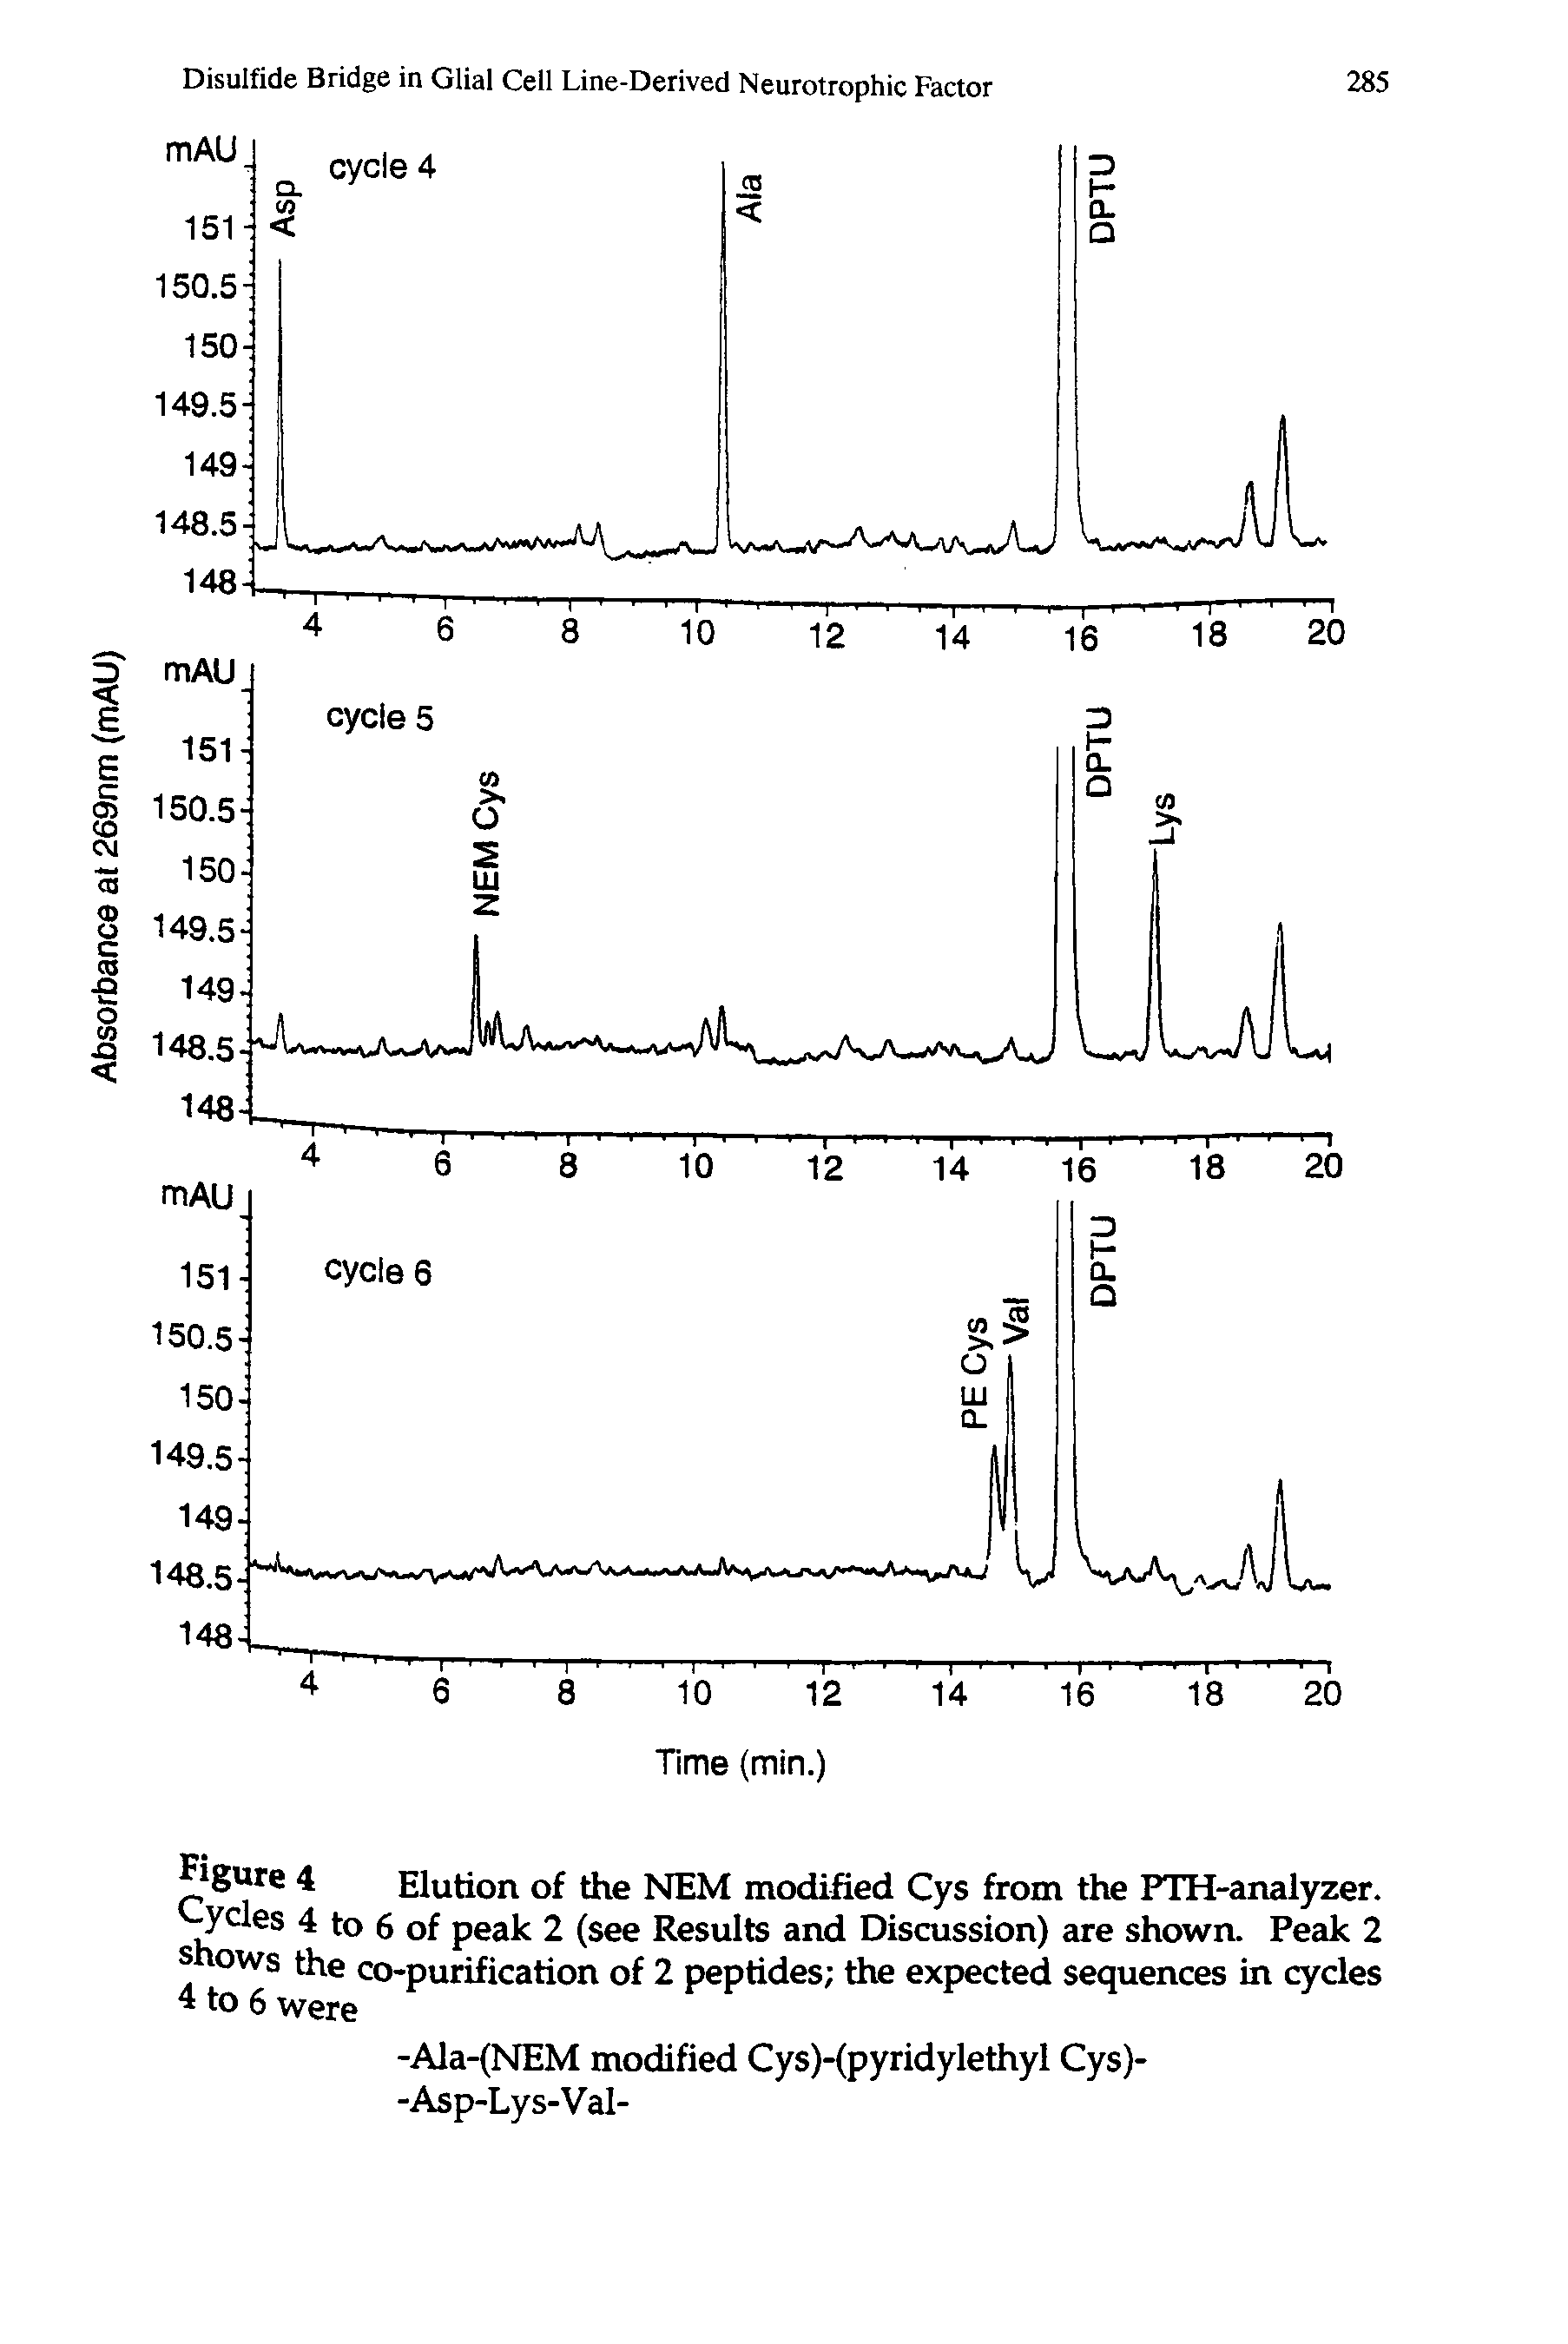 Figure 4 Elution of the NEM modified Cys from the PTH-analyzer. Cycles 4 to 6 of peak 2 (see Results and Discussion) are shown. Peak 2 shows the co-purification of 2 peptides the expected sequences in cycles 4 to 6 were...